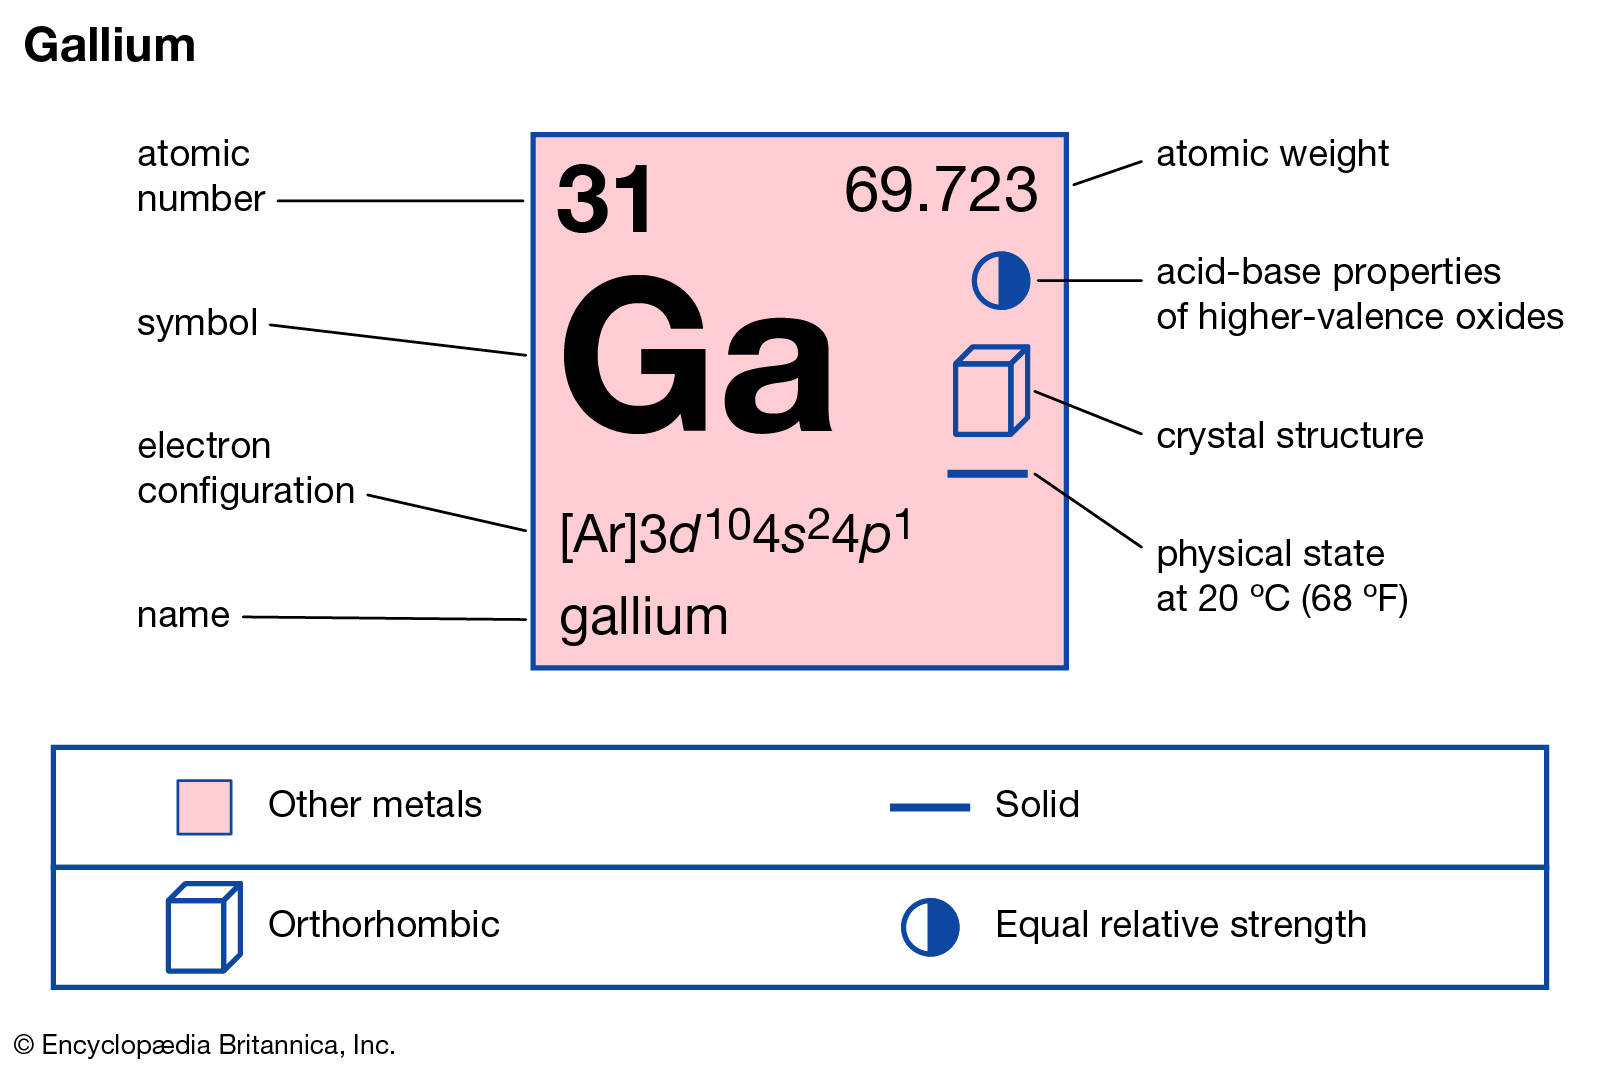 hinh-anh-interesting-facts-about-gallium-63-0